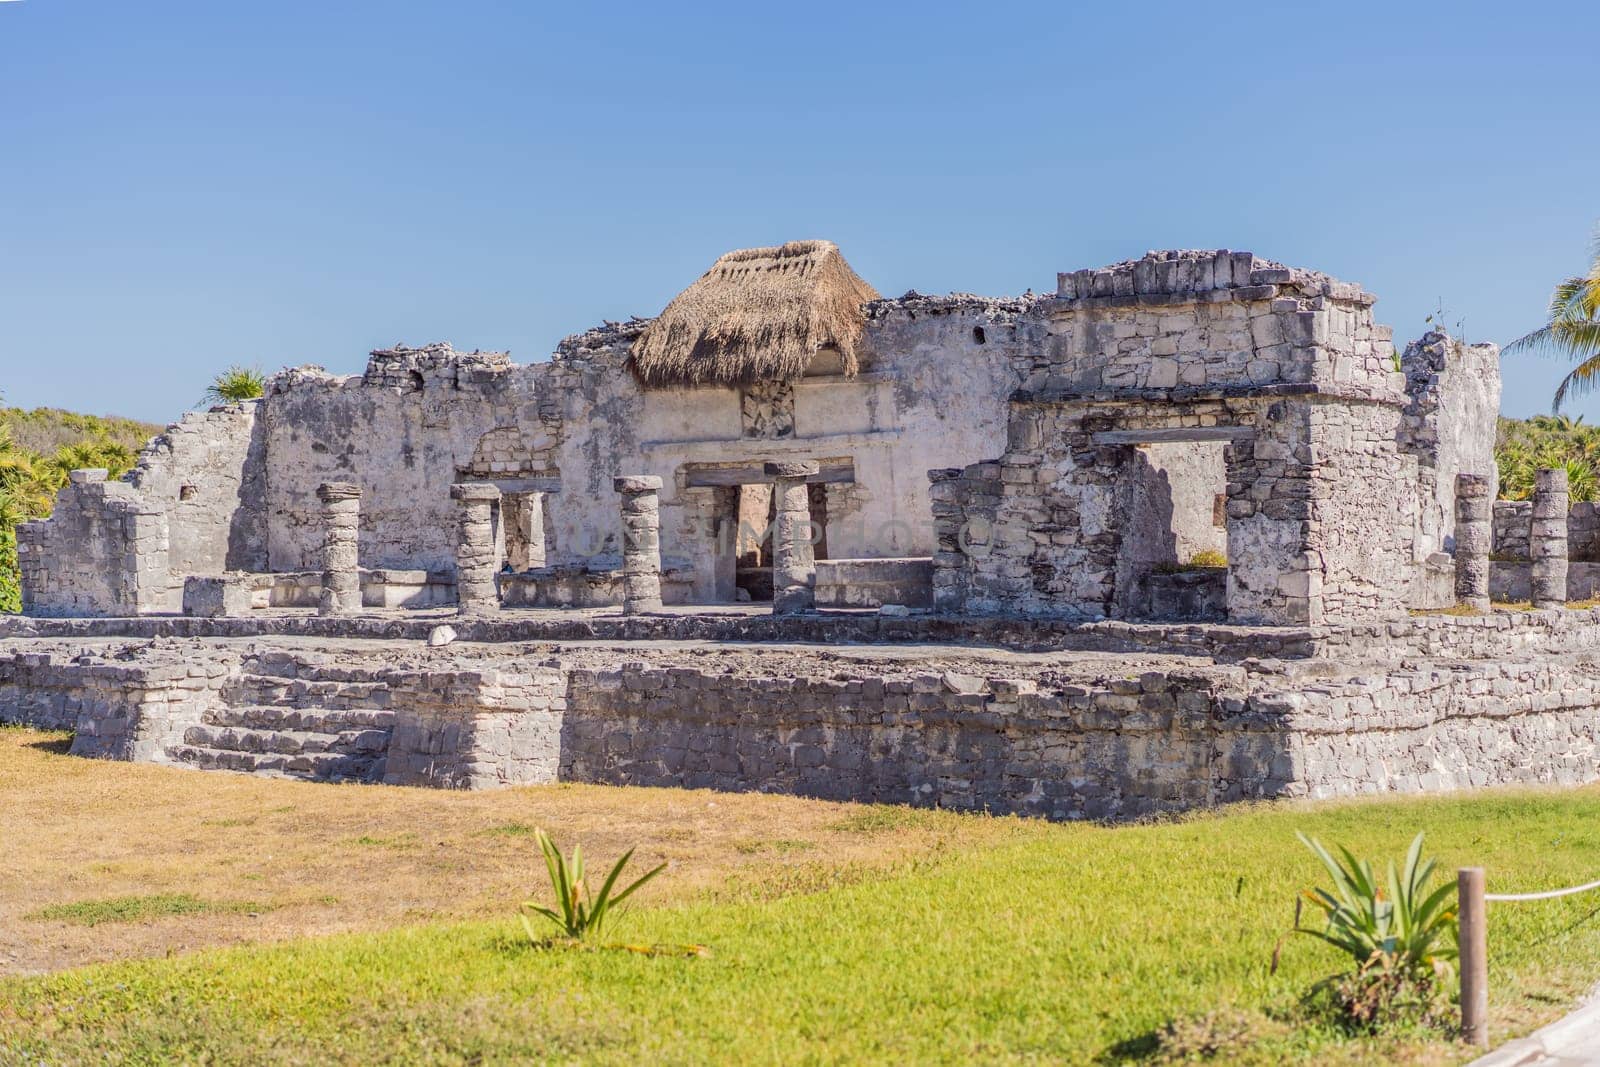 Beautiful archaeological site of the Mayan culture in Tulum, Mexico by galitskaya